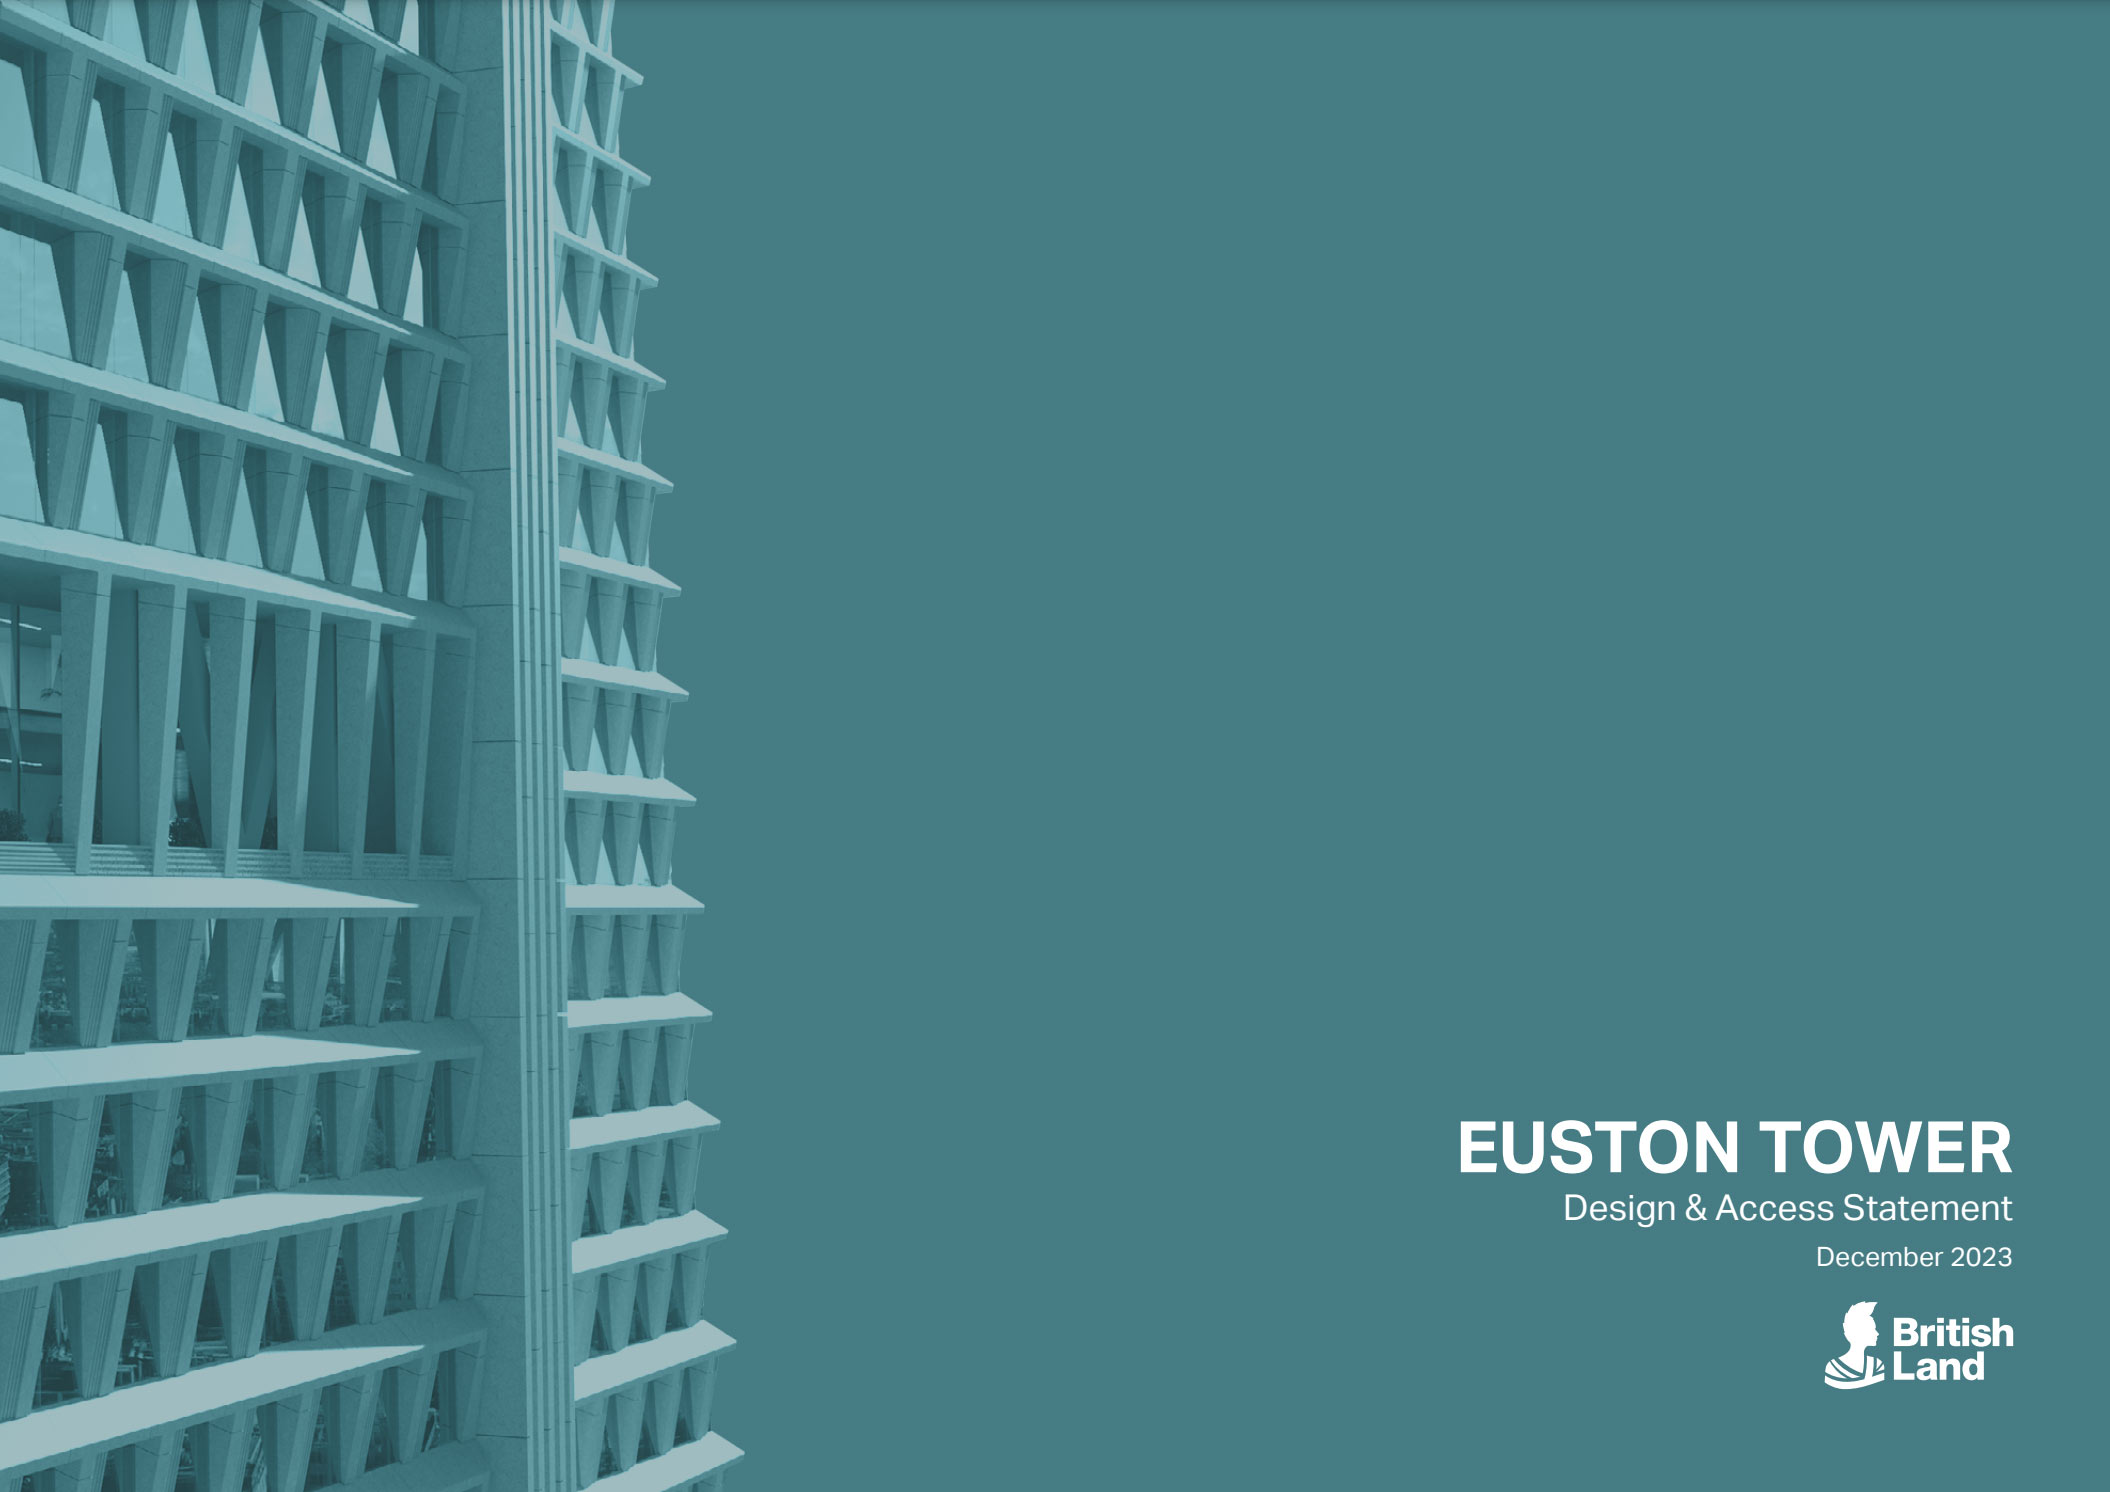 British Land submits plans for the redevelopment of Euston Tower